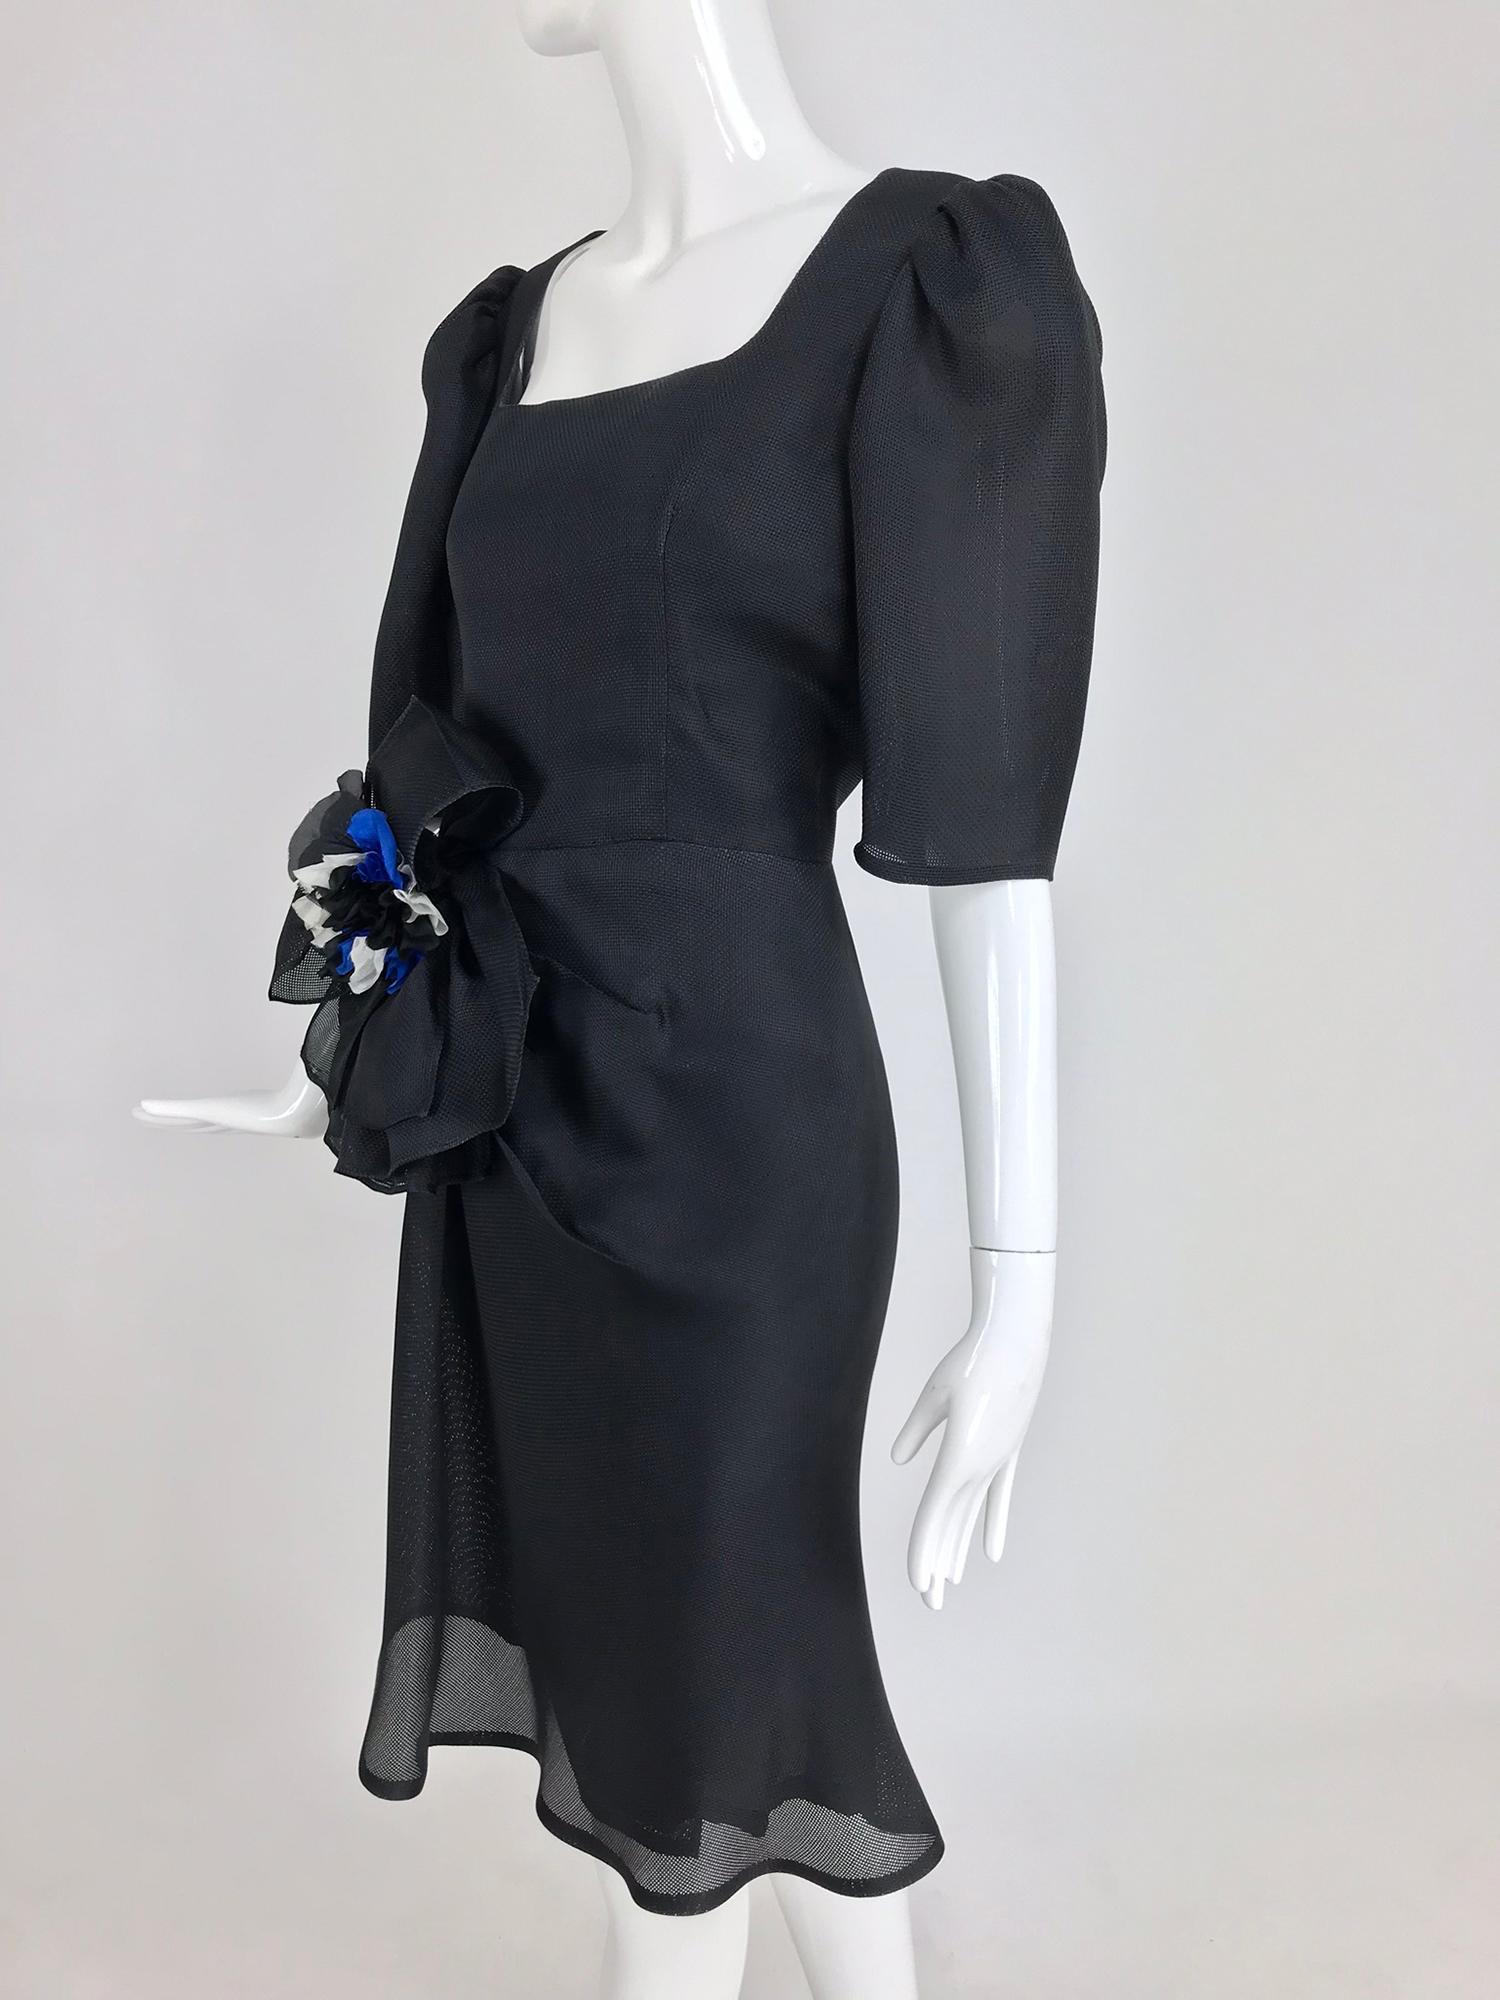 Givency Black Textured Silk Dress with Hip Bow 1990s For Sale 9